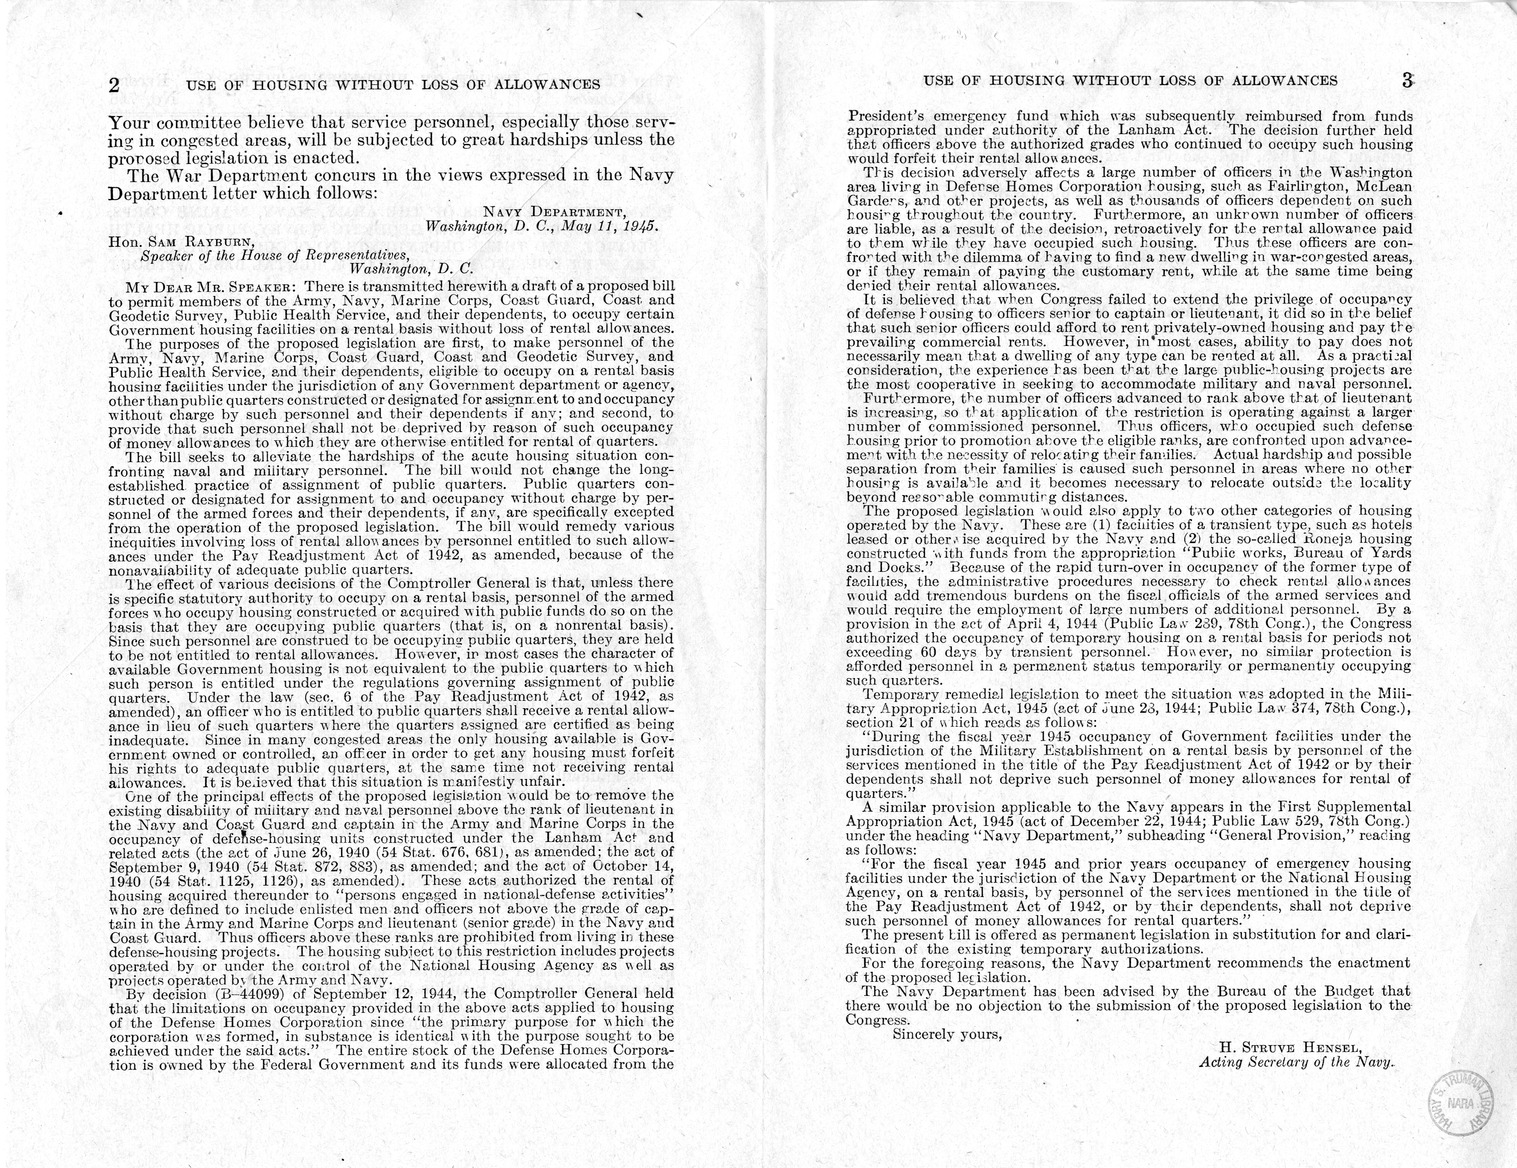 Memorandum from Harold D. Smith to M. C. Latta, H.R. 3233, To Permit Members of the Army, Navy, Marine Corps, Coast Guard, Coast and Geodetic Survey, Public Health Service, and Their Dependents, to Occupy Certain Government Housing Facilities on a Rental 